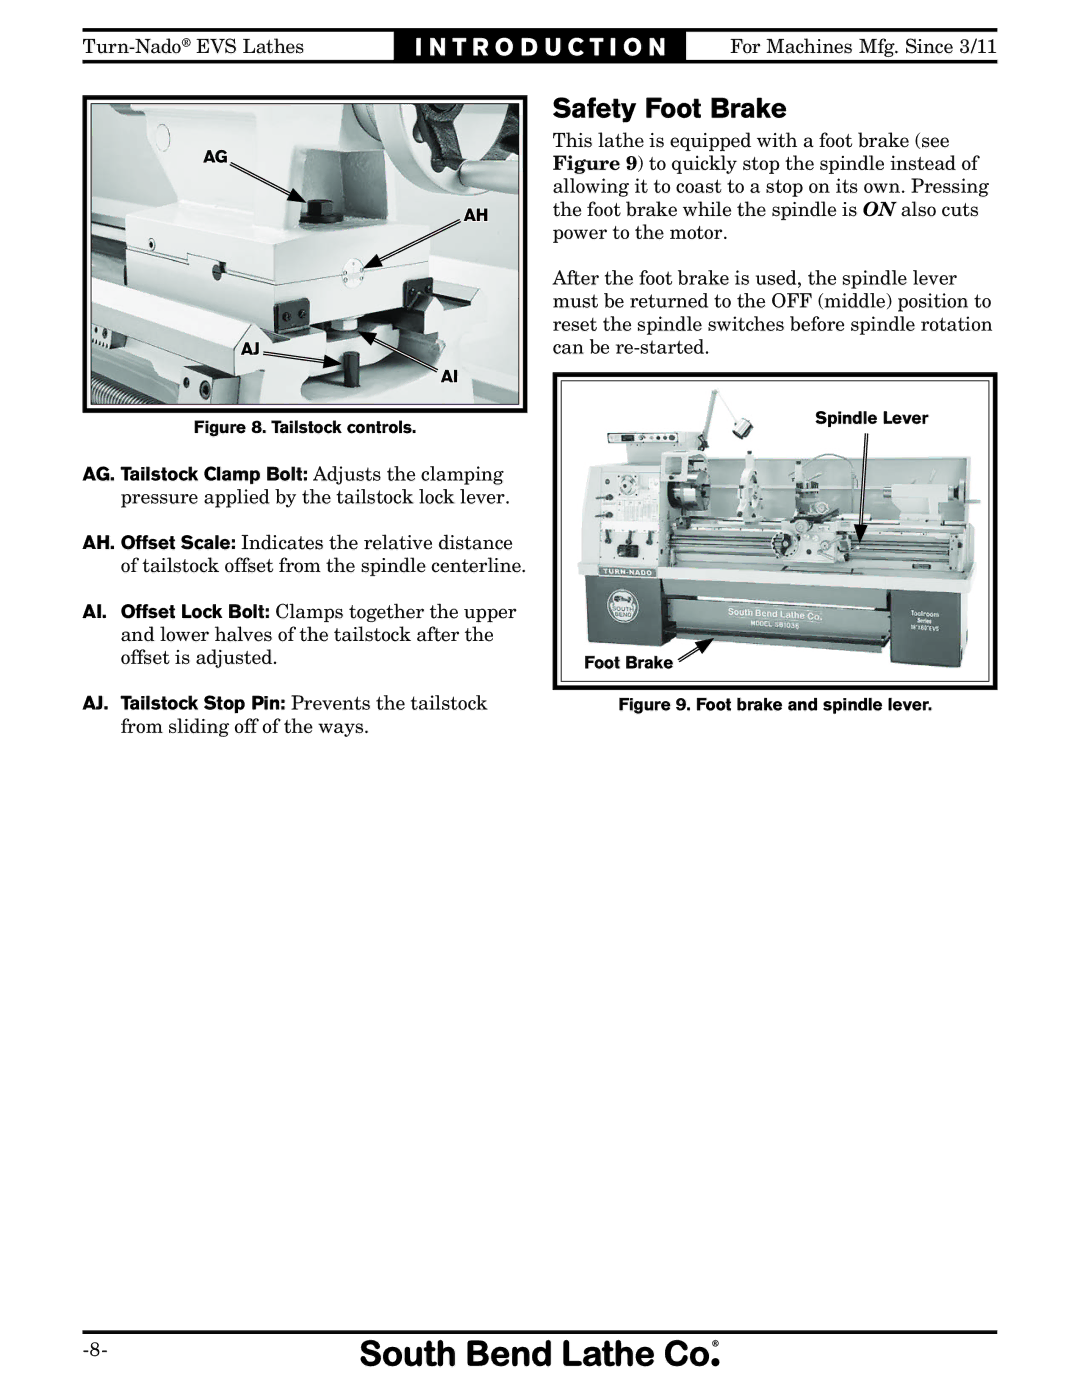 Southbend SB1042PF owner manual Safety Foot Brake, Foot brake and spindle lever 